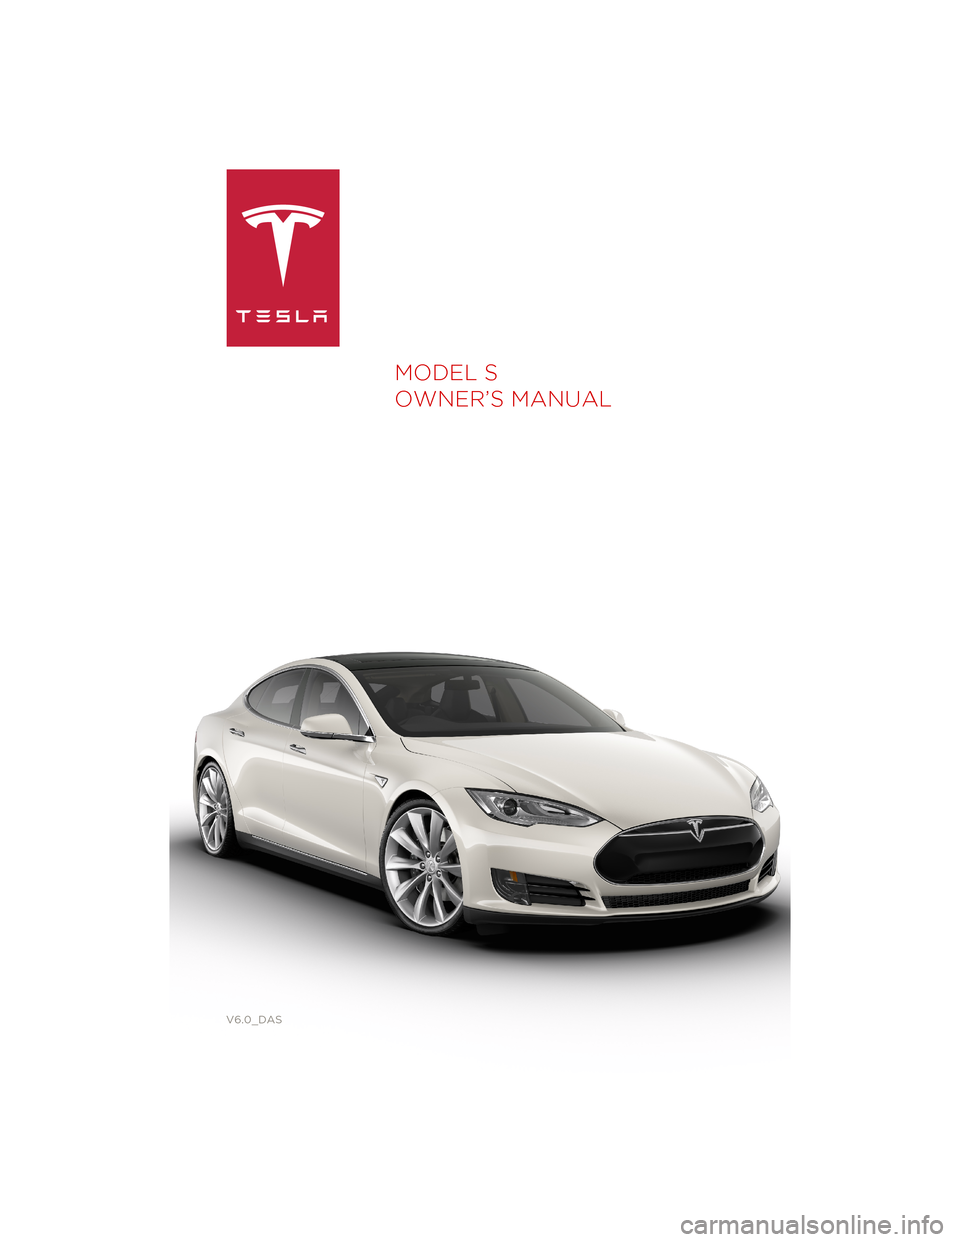 TESLA MODEL S 2014  Owners manual (North America) MODEL S
OWNER’S MANUAL
V6.0_DAS
Cover - North America 5.8.2.fm  Page 1  Thursday, January 16, 2014  3:10 PM 